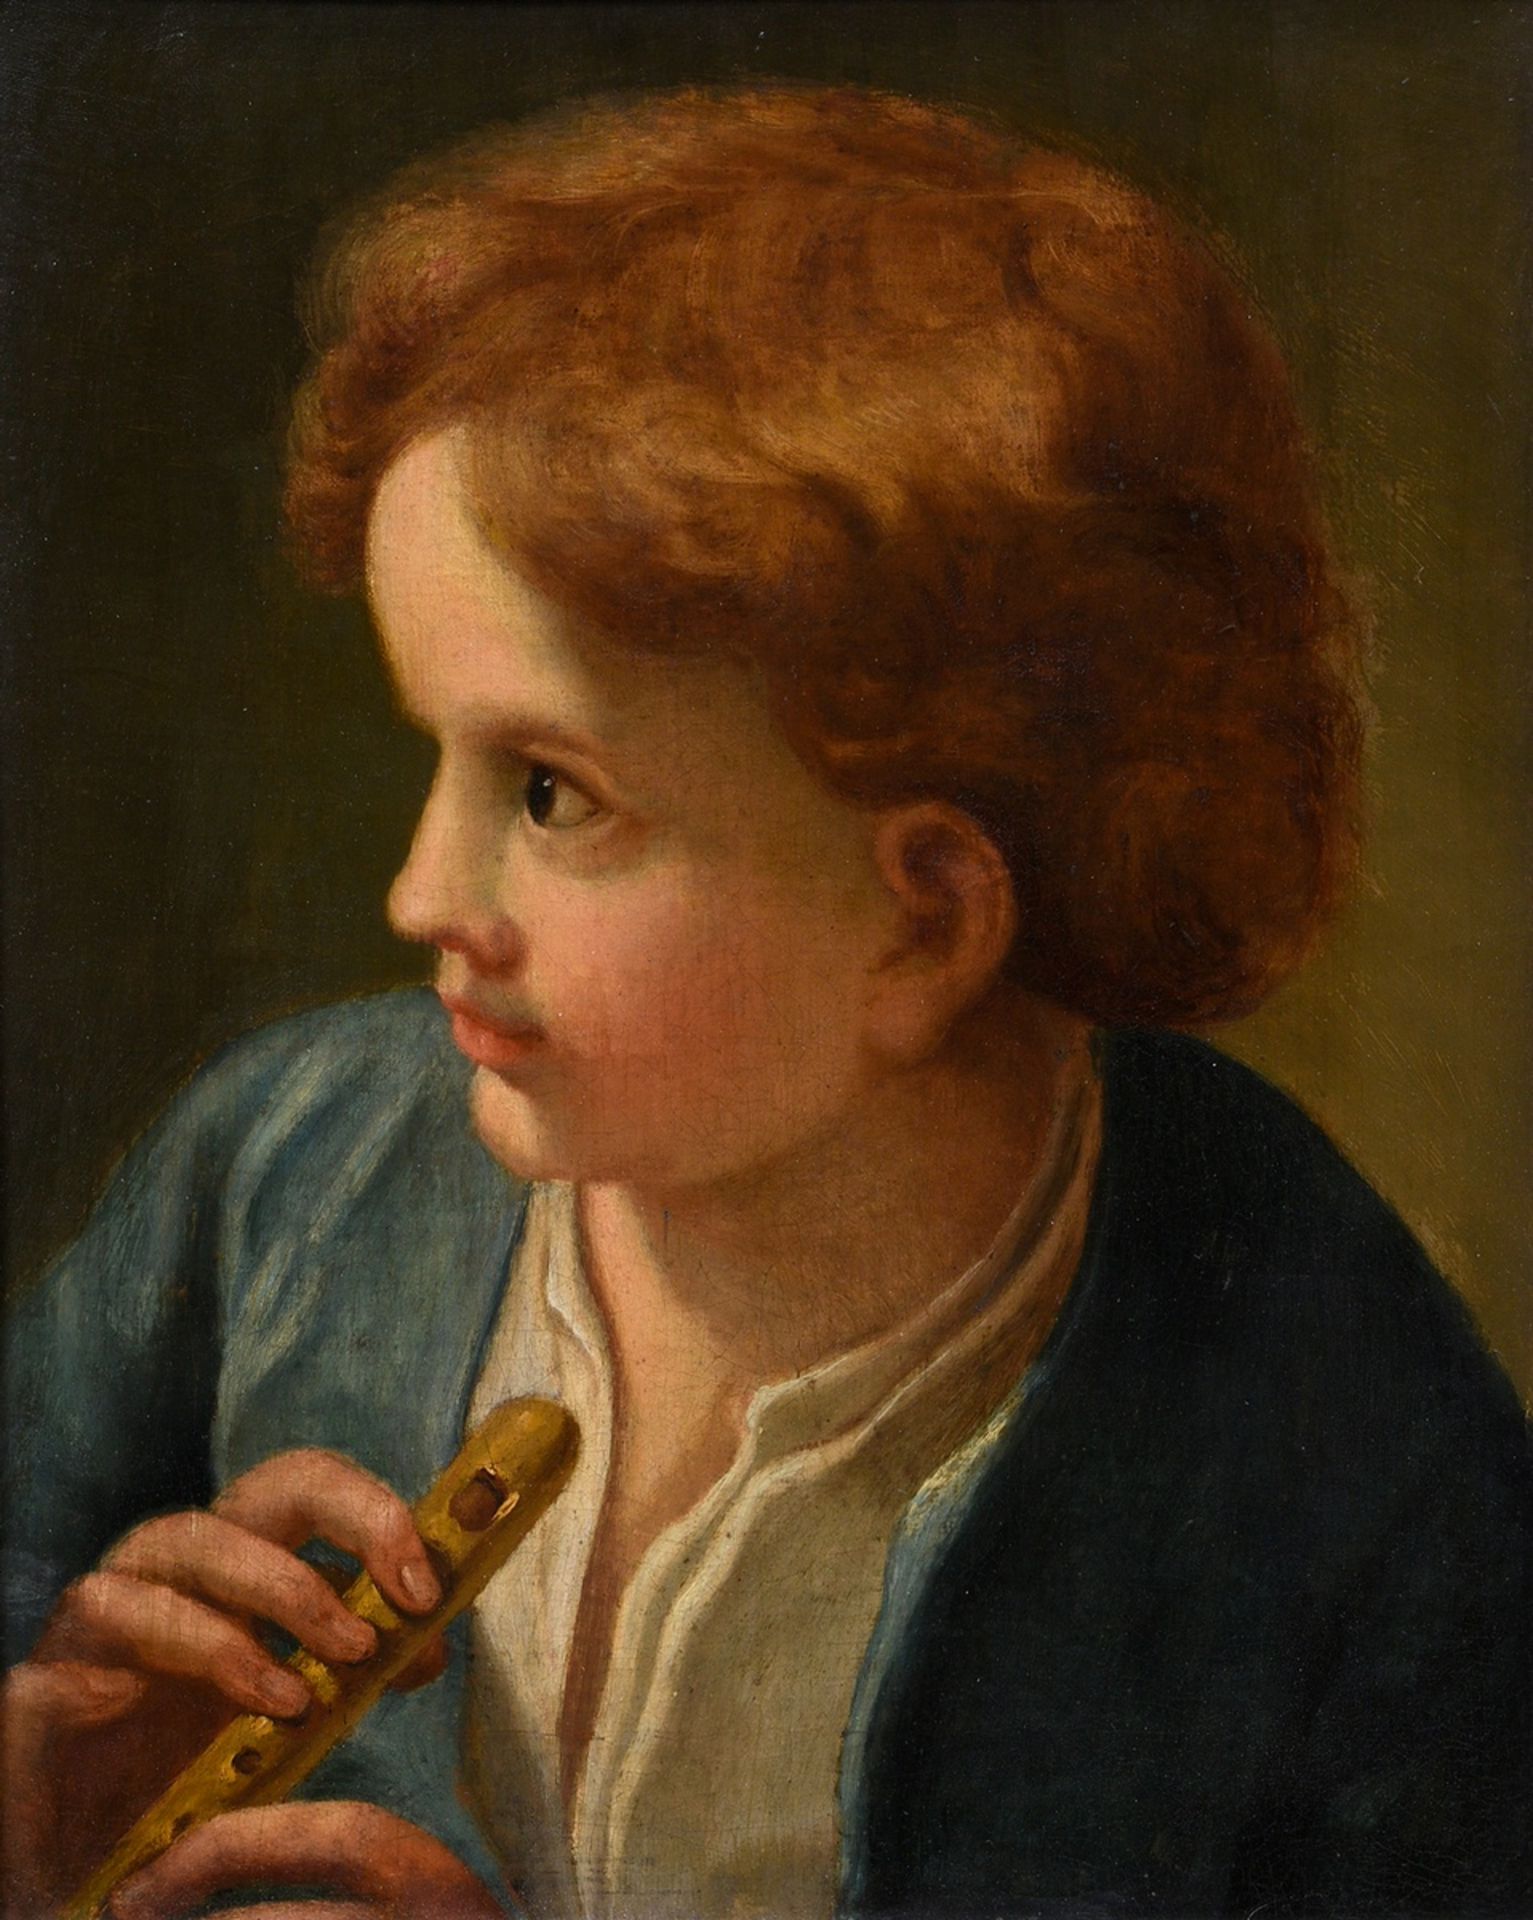 Pair of "Child Portraits" by an unknown painter of the 18th/19th c., oil/canvas on wood, magnificen - Image 5 of 8